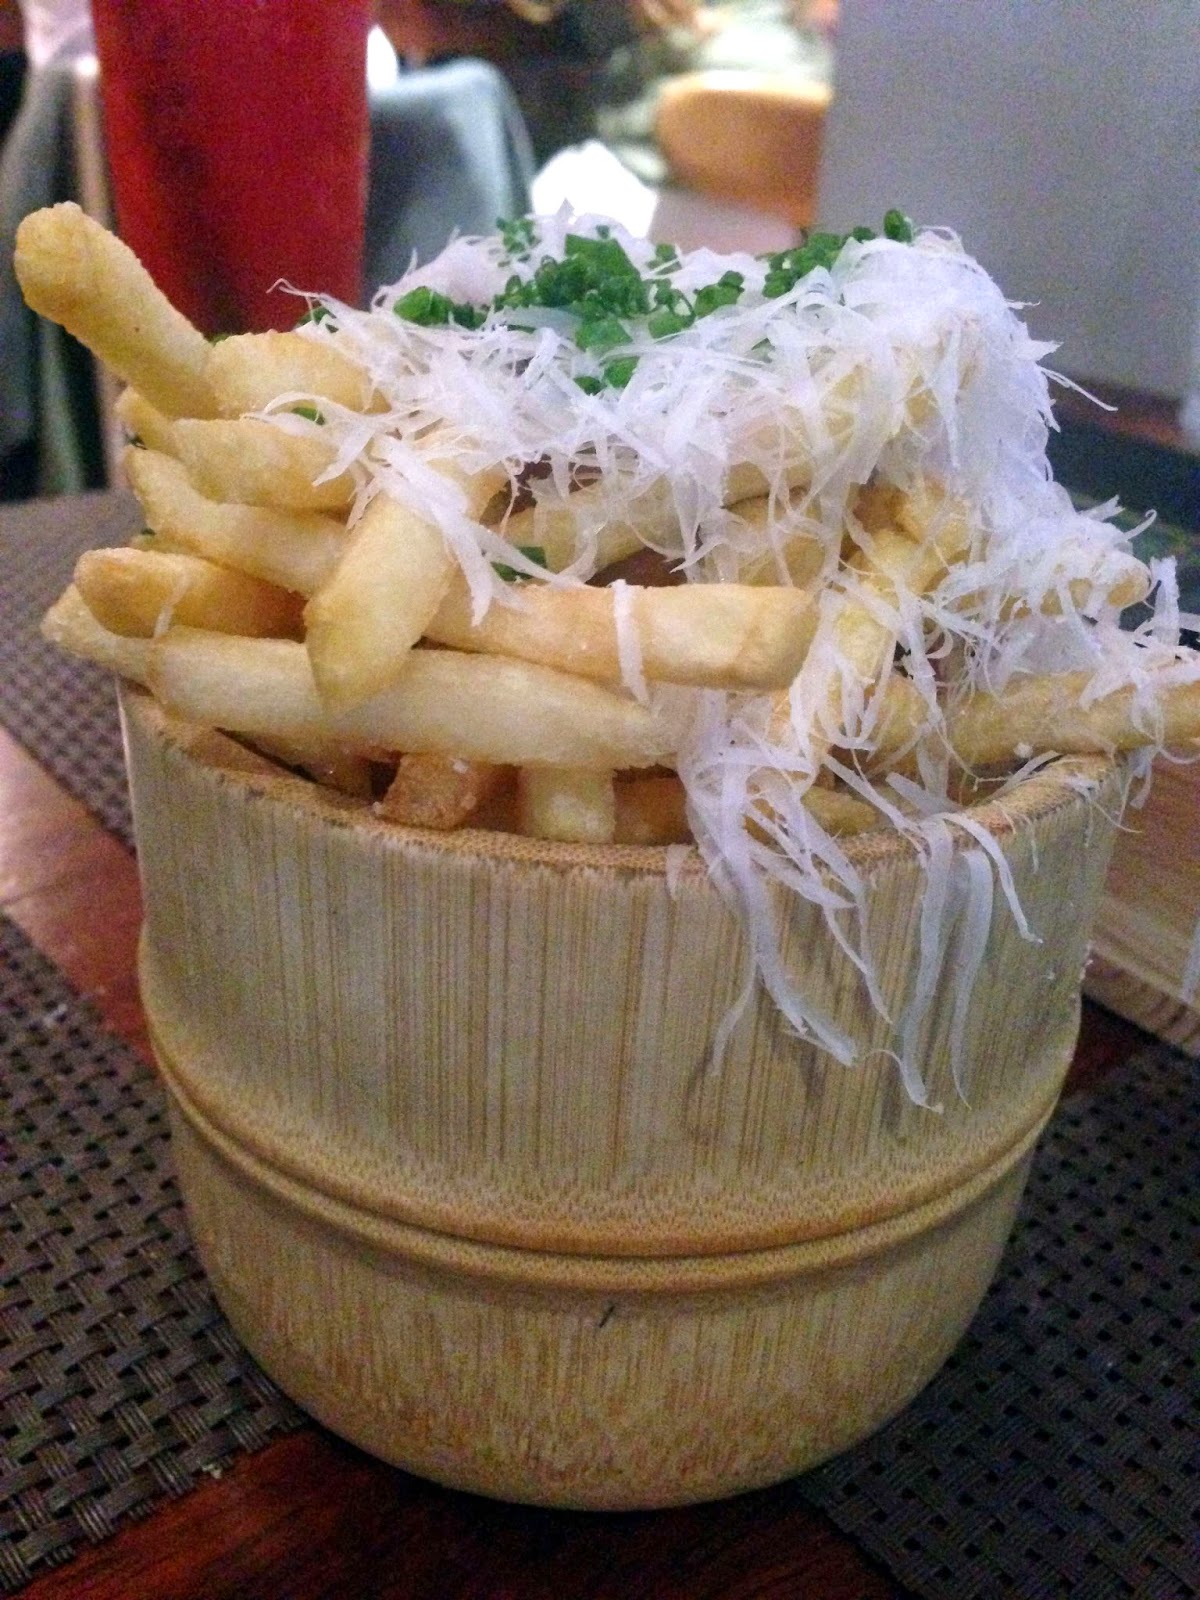 Stitch & Bear - Fade Street Social - Fries with onion puree and parmesan